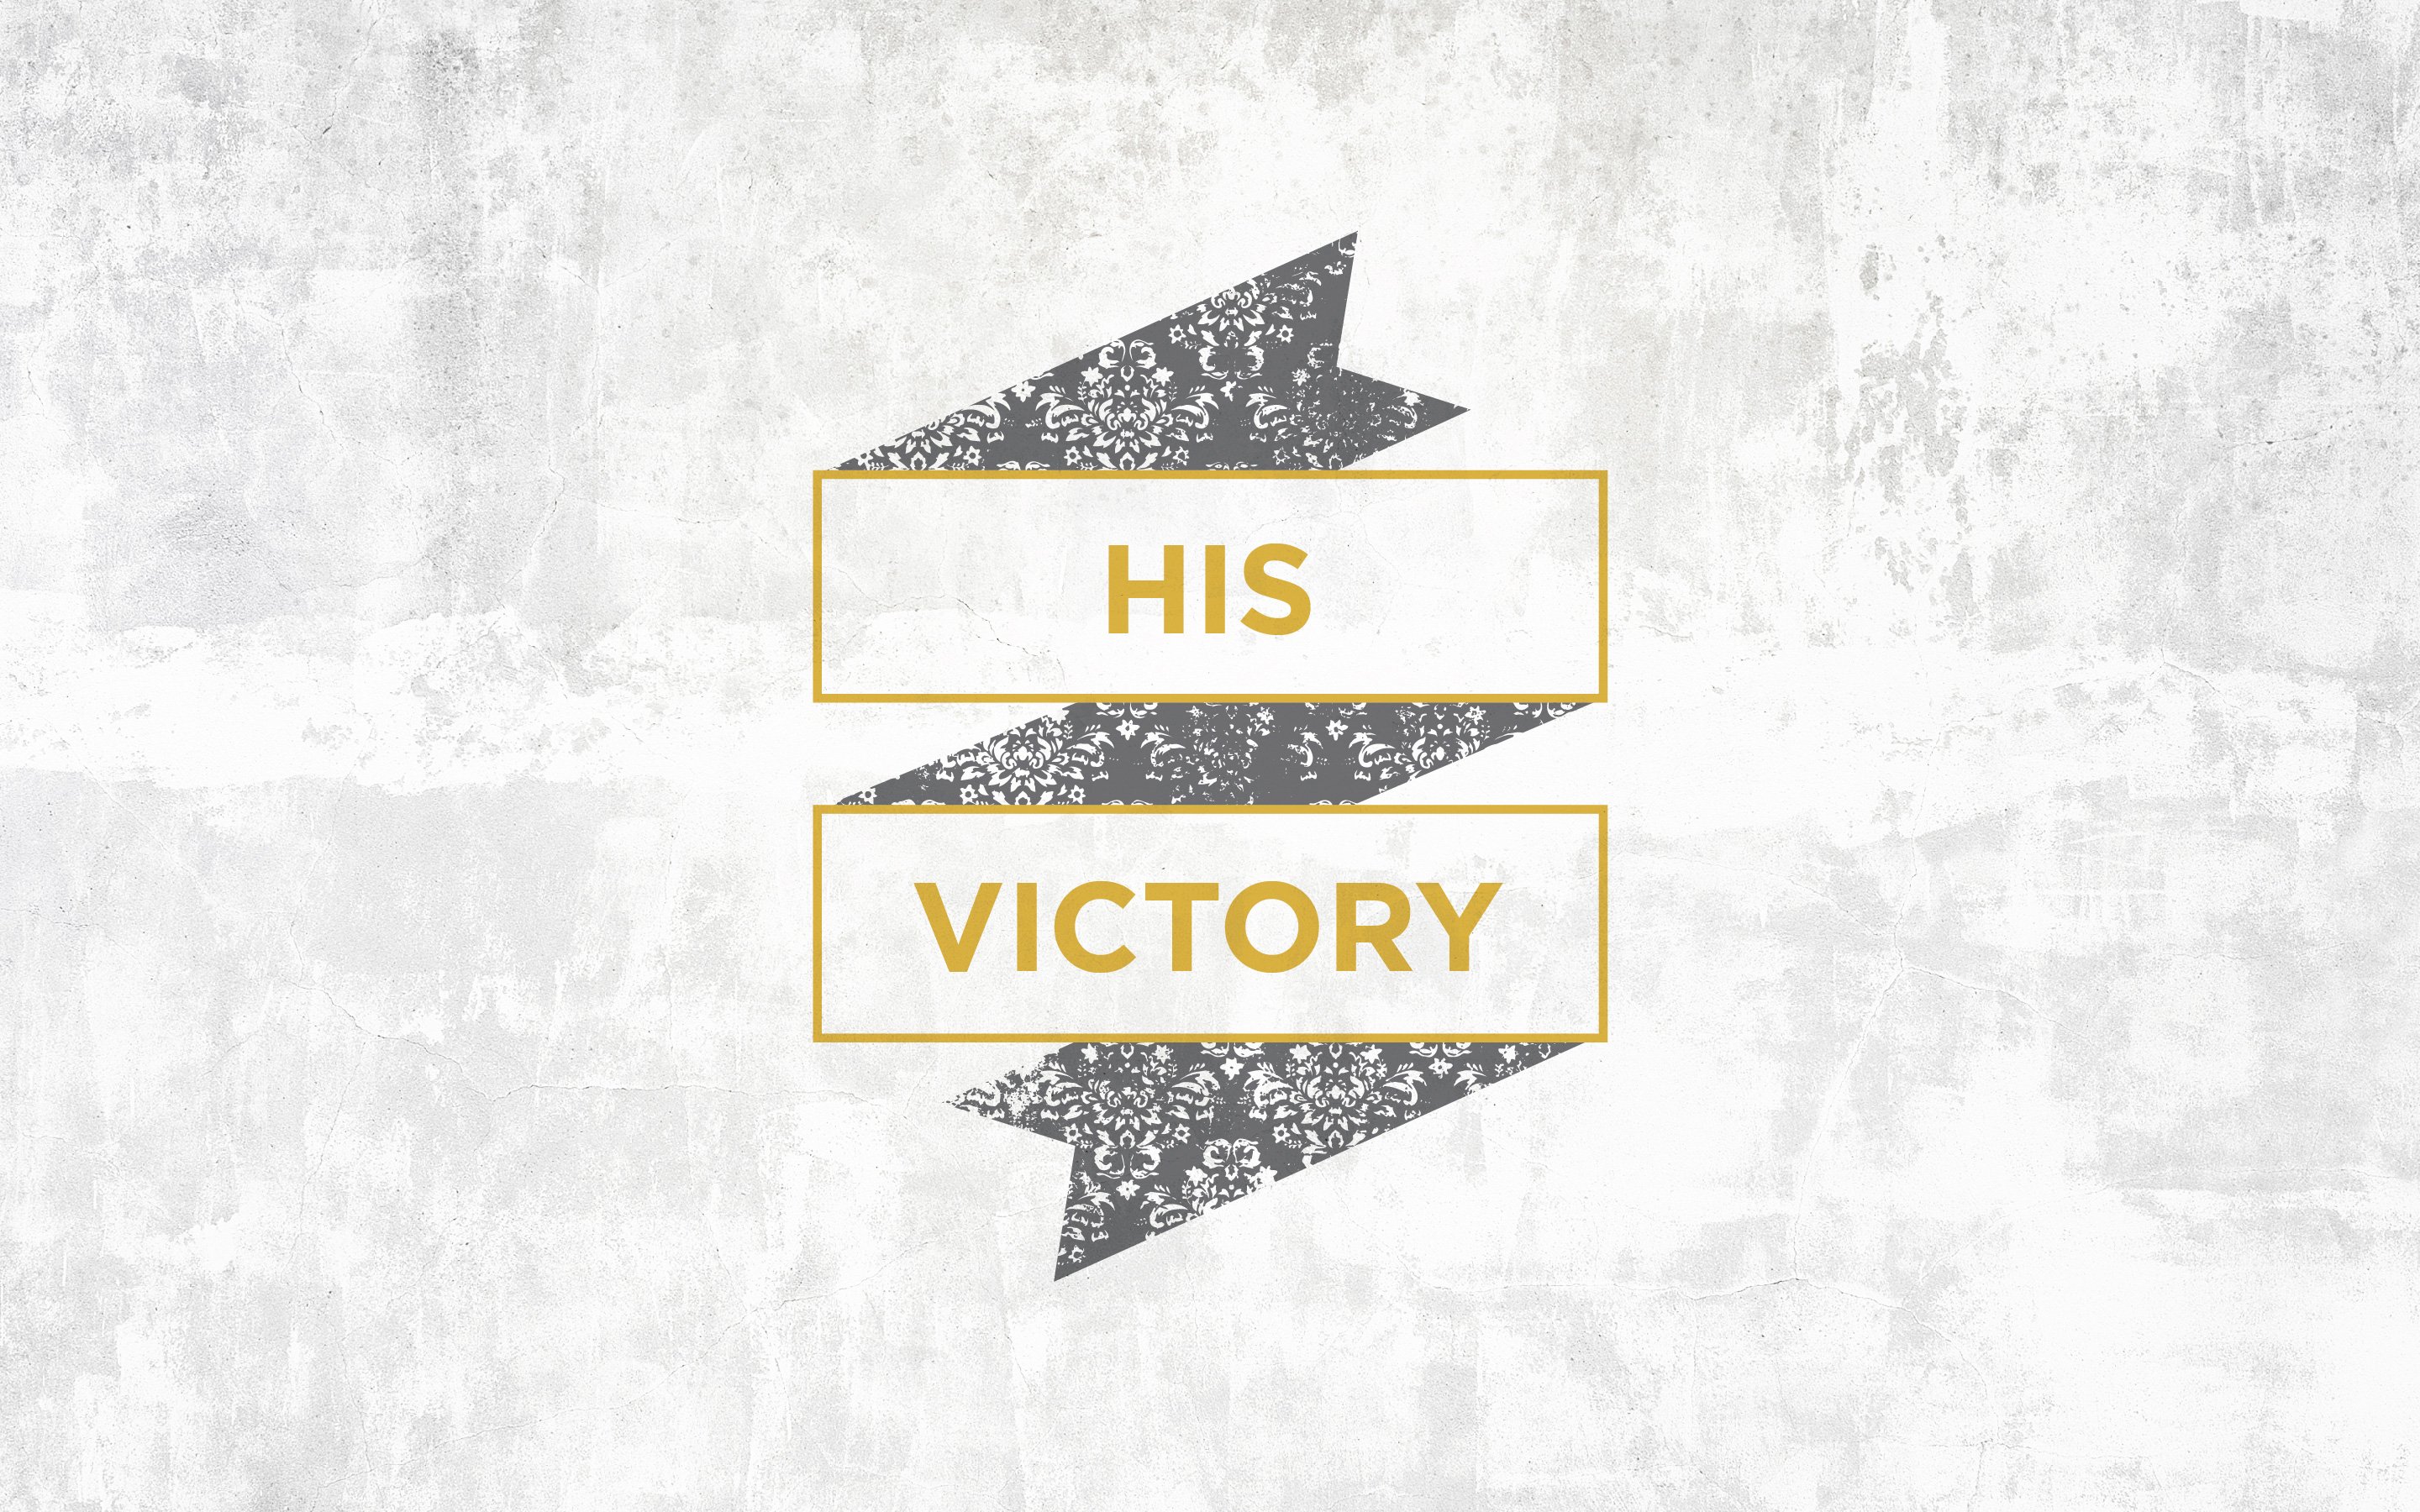 The Well Wallpaper: His Victory